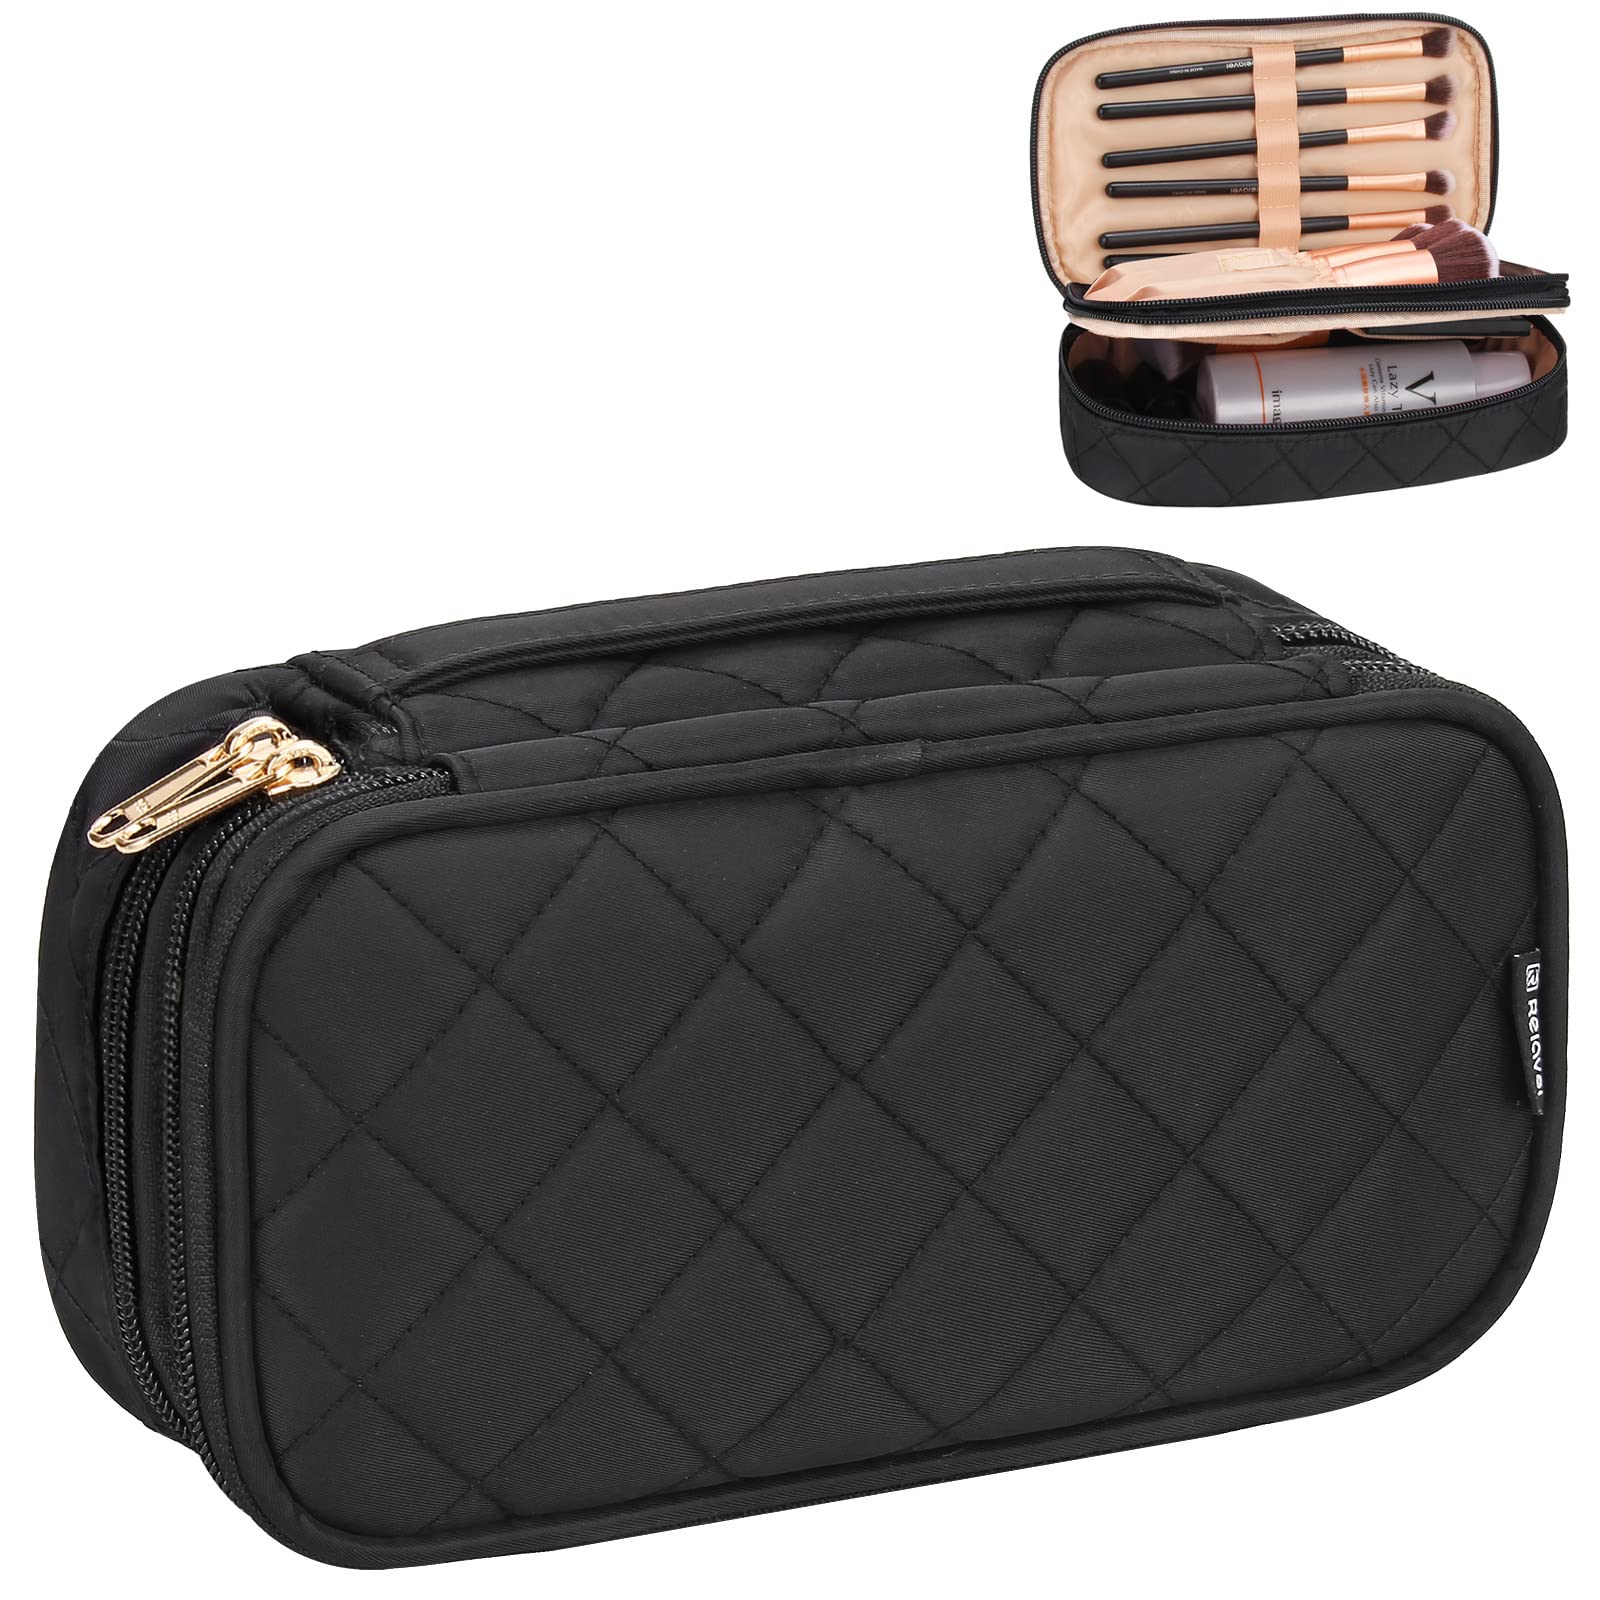  EACHY Small Makeup Bag for Travel Organization